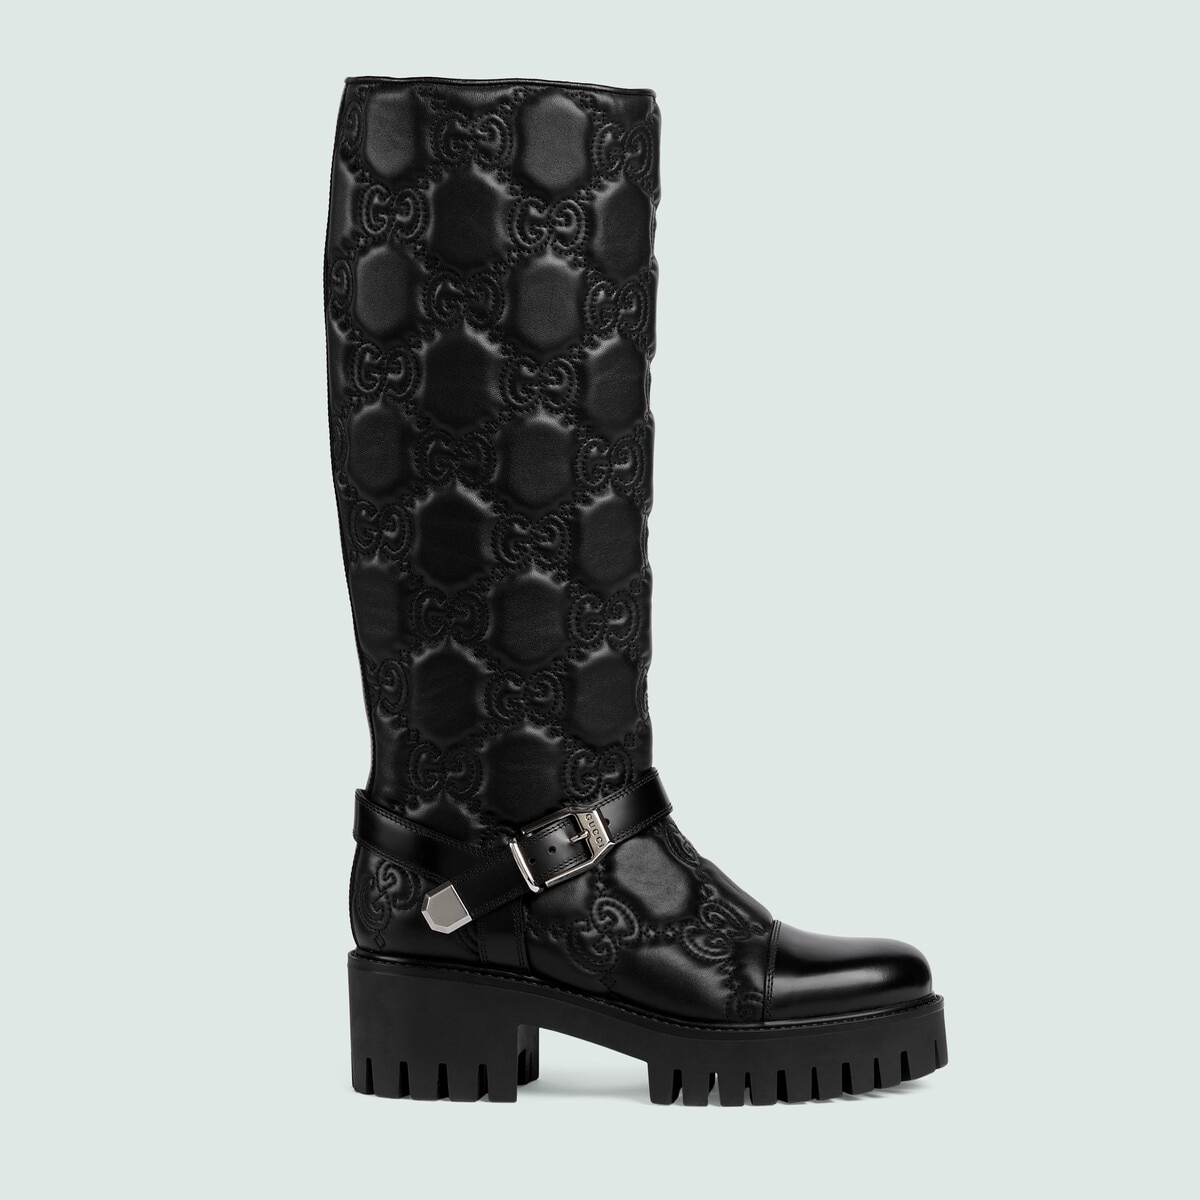 Women's GG quilted boot - 1